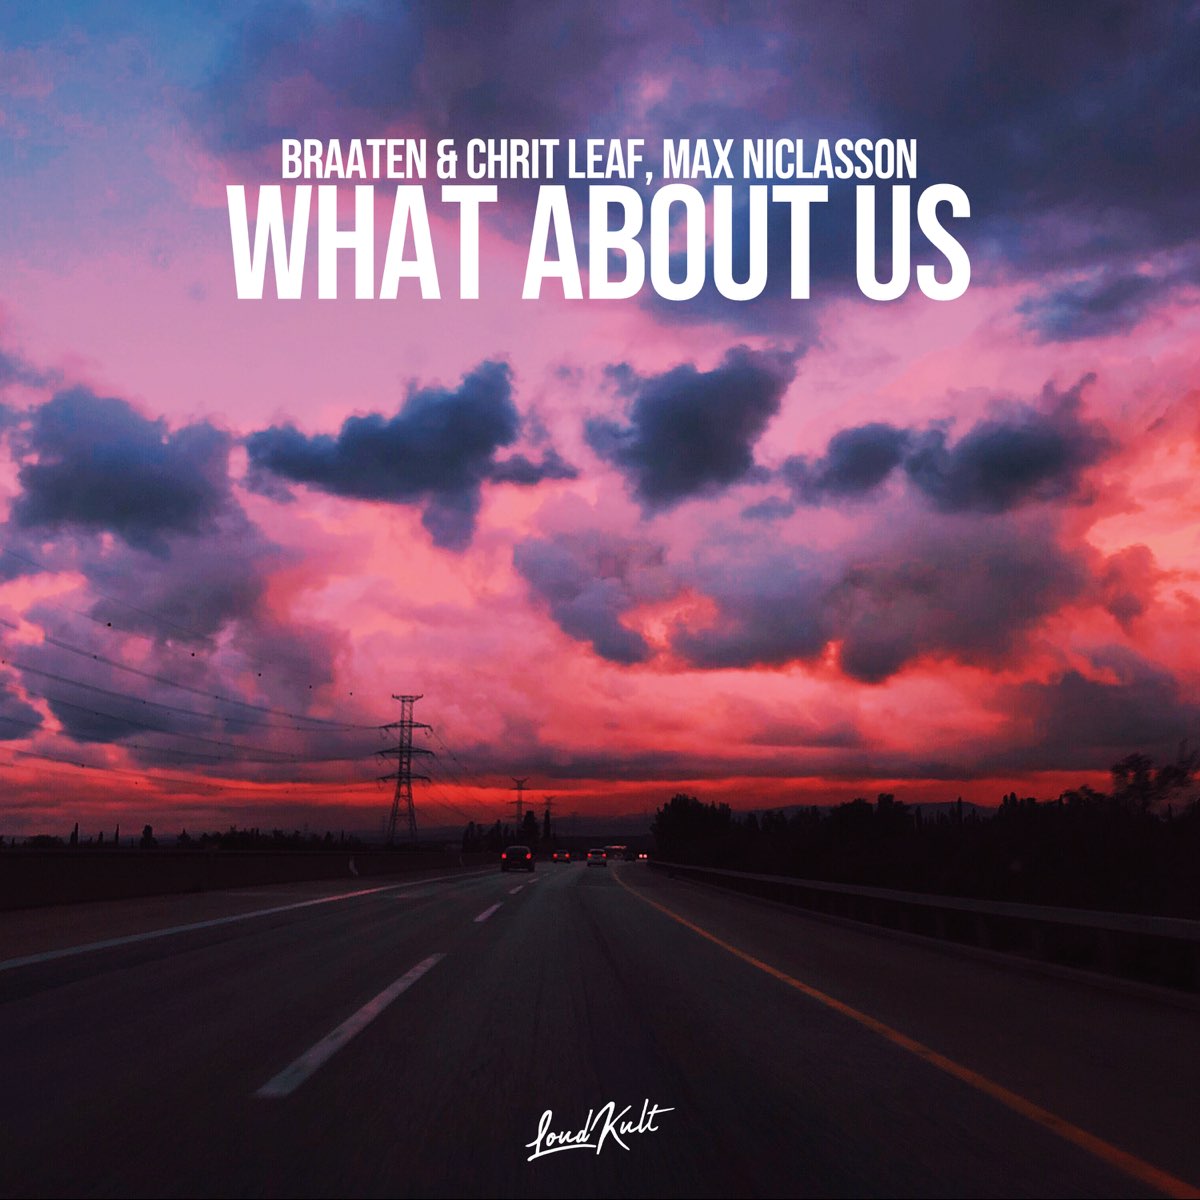 What About Us (feat. Max Niclasson) - Single by Braaten & Chrit Leaf on  Apple Music